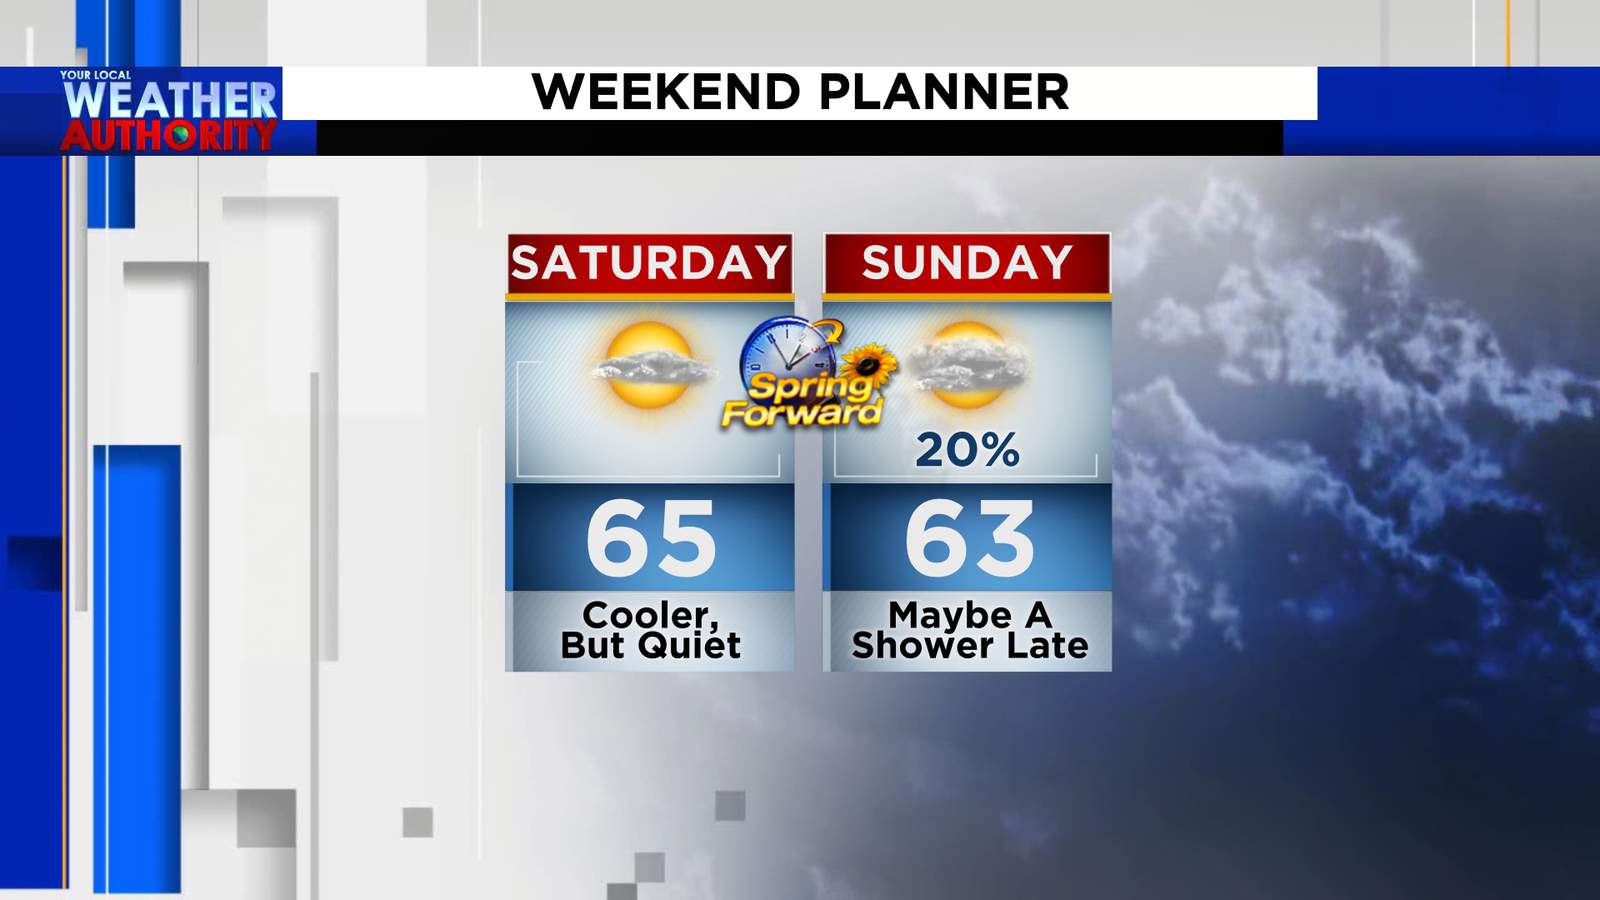 Cooler, mainly dry this weekend as we ‘spring forward’ into Daylight Saving Time